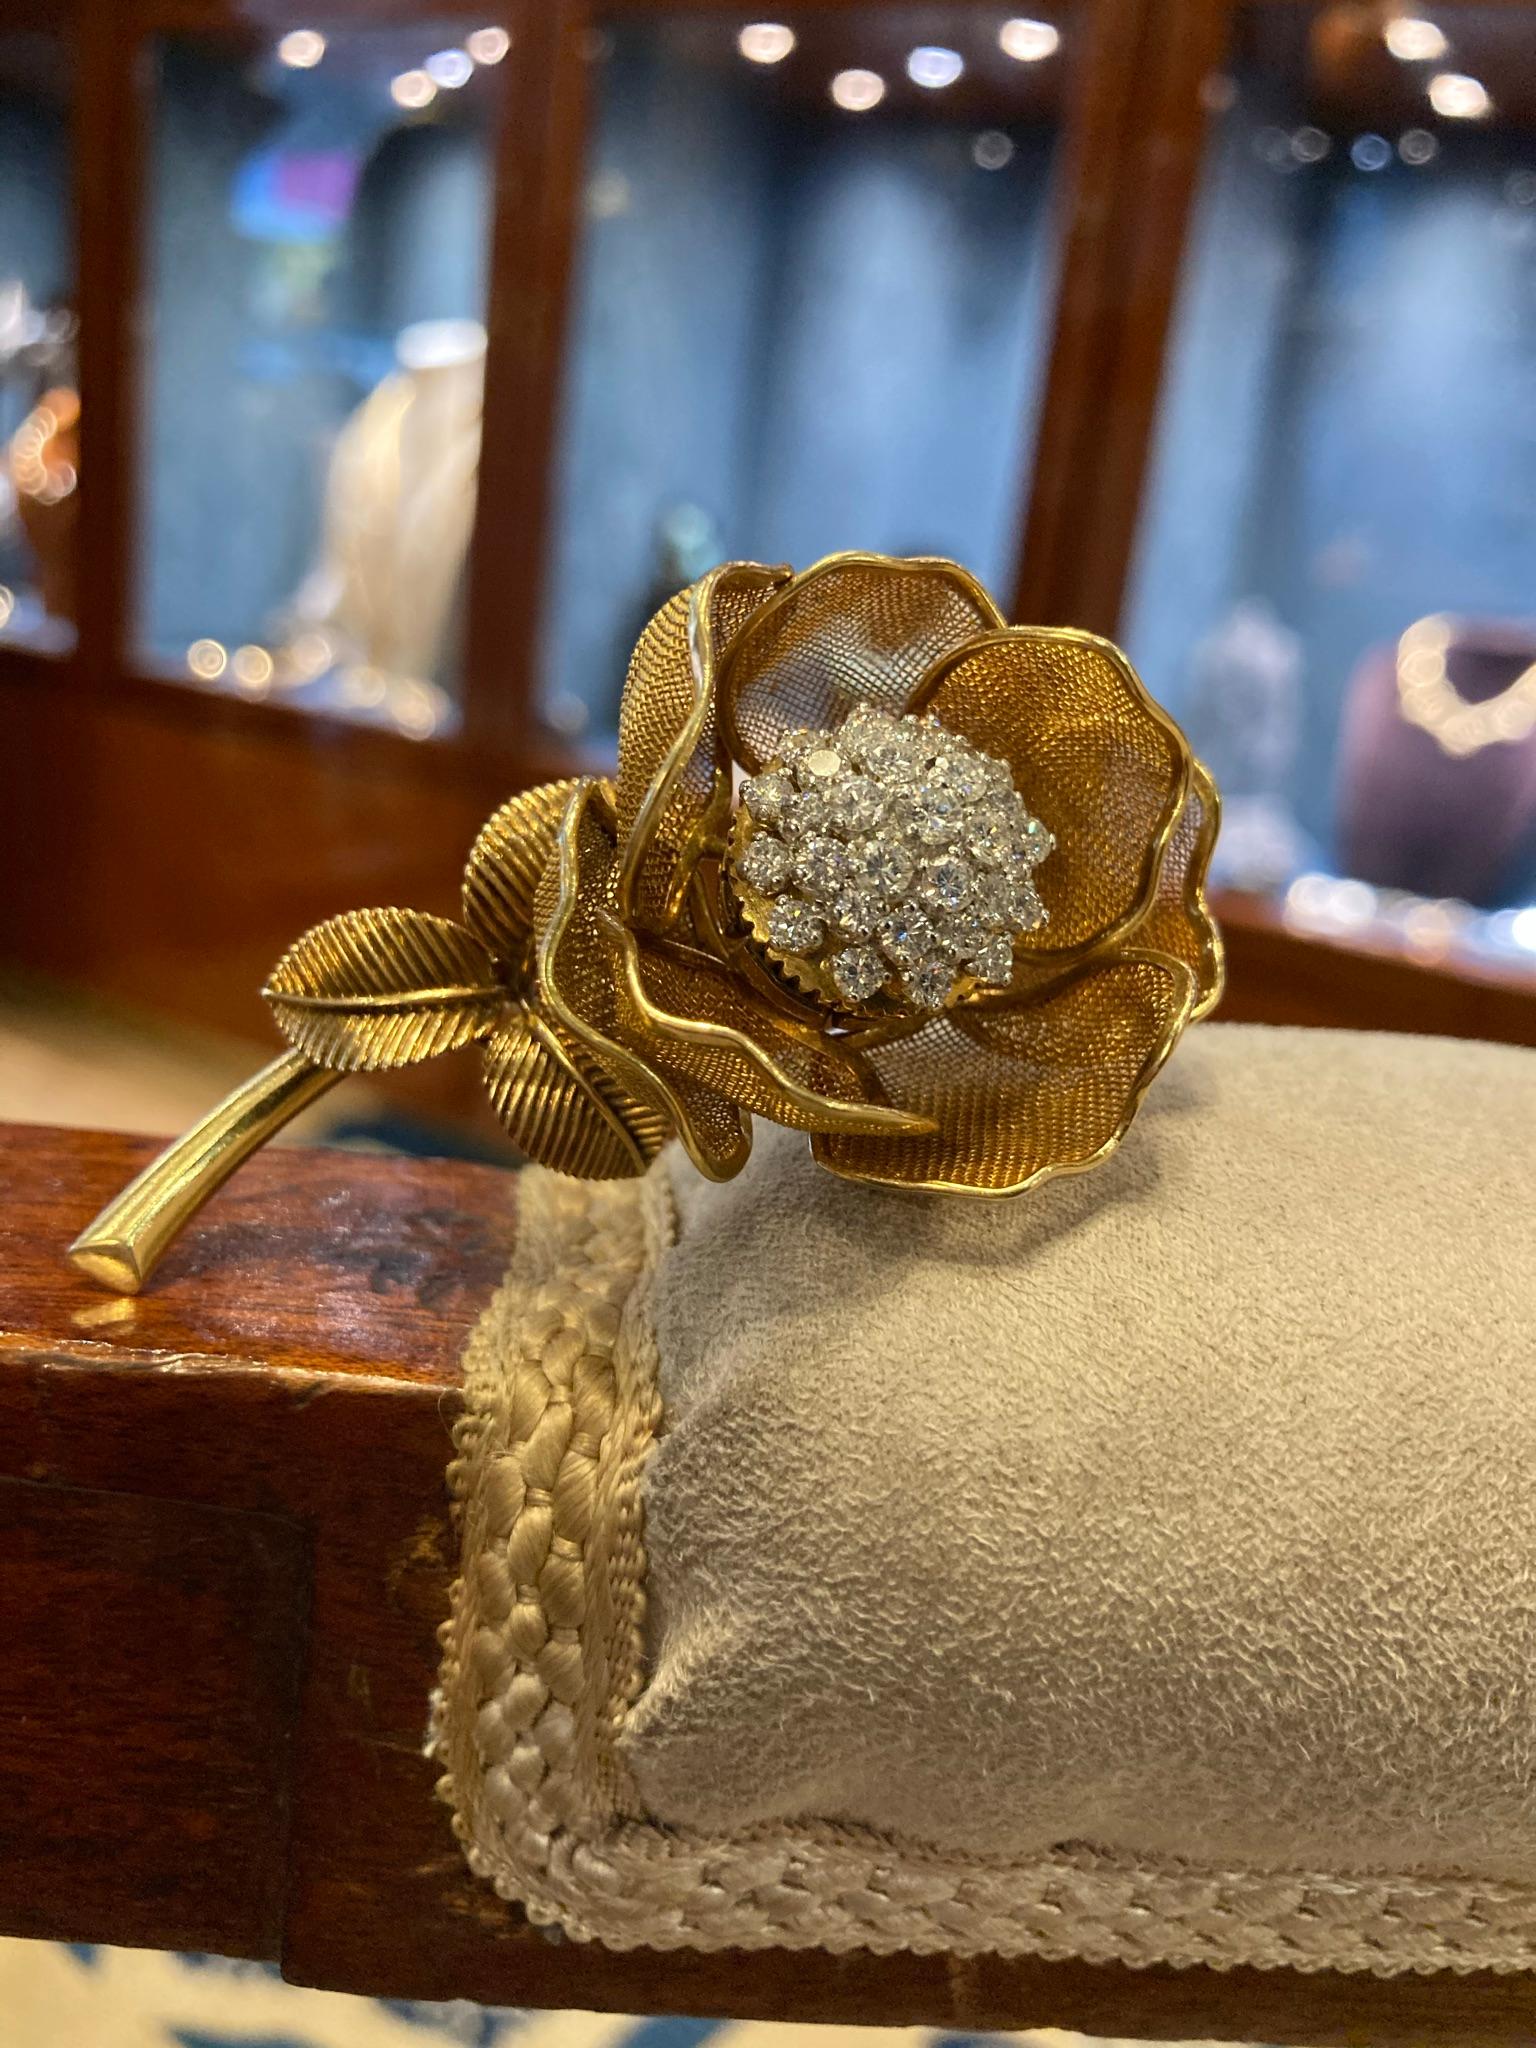 A beautiful Cartier flower brooch in 18 karat yellow gold with gold mesh petals surrounding a center cluster of round brilliant cut diamonds, and three fluted leaves. France, circa 1950s. The petals can be opened and closed.